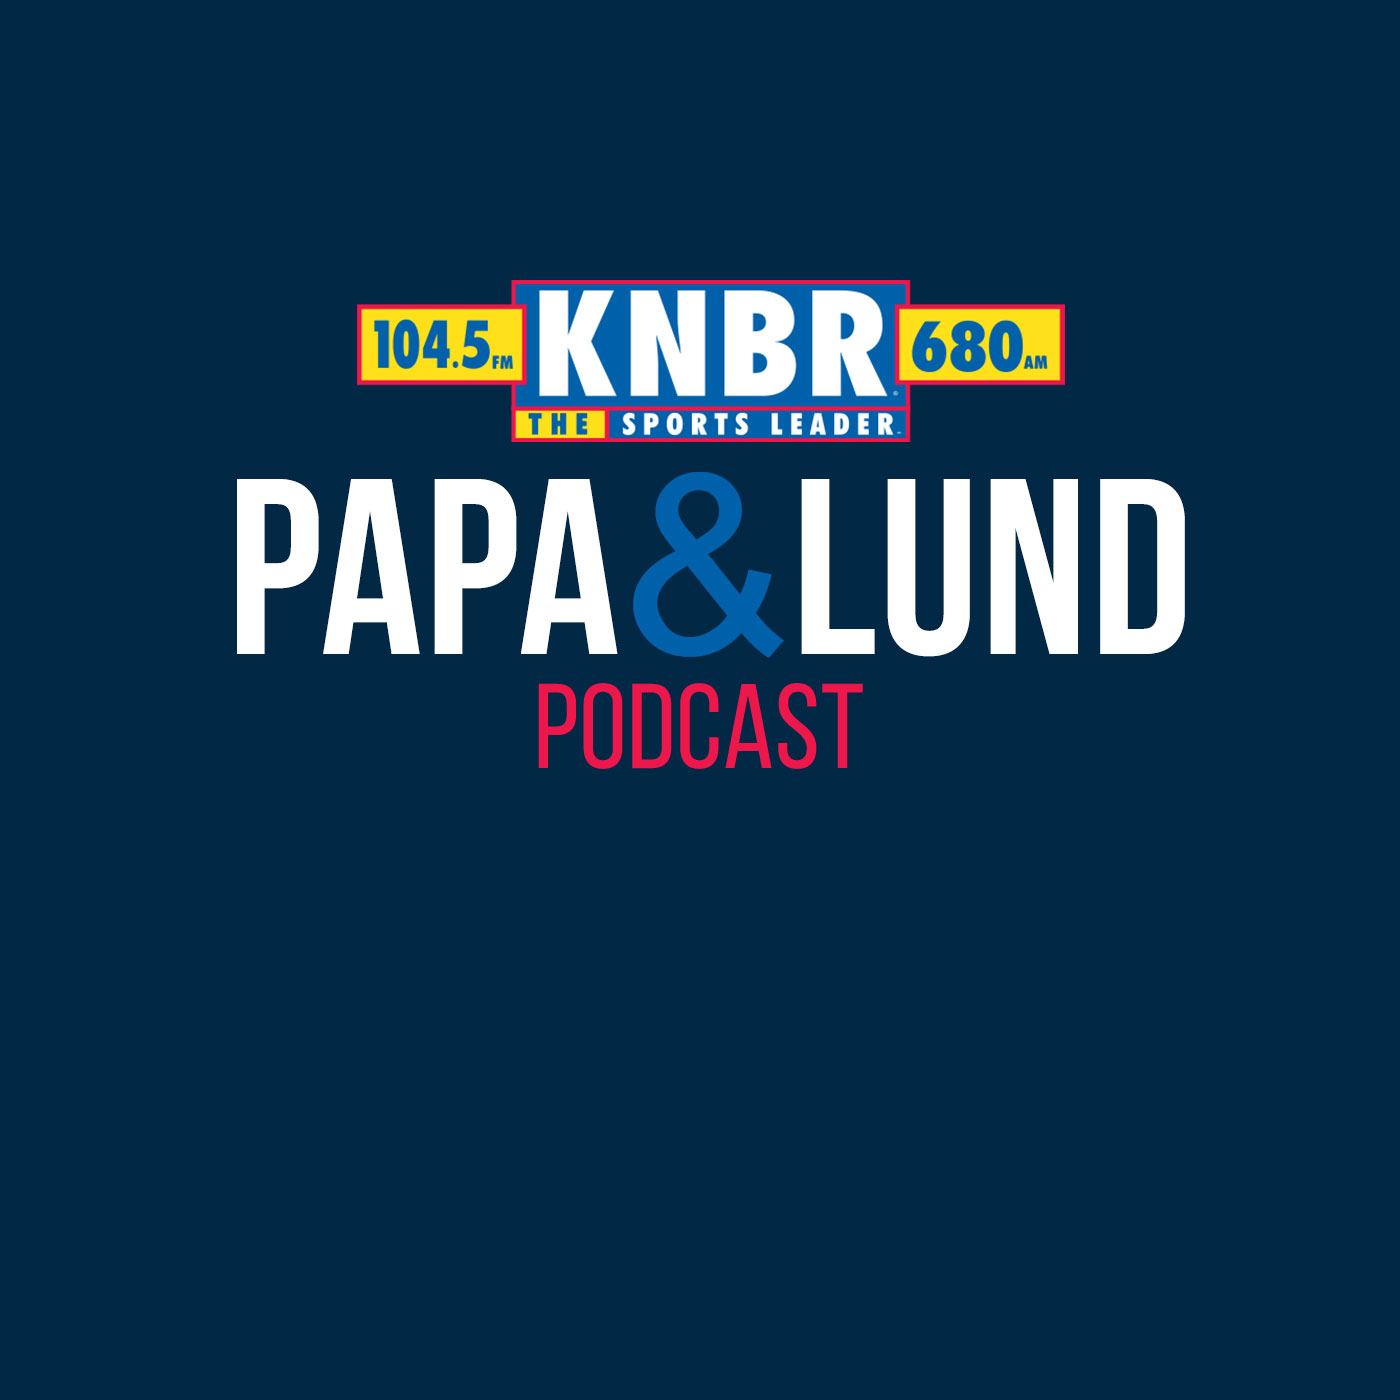 4-17 Kurt Helin joins Papa & Lund to discuss what the Warriors need in order to get back to being a title contender as well as what the potential market could be for Klay Thompson